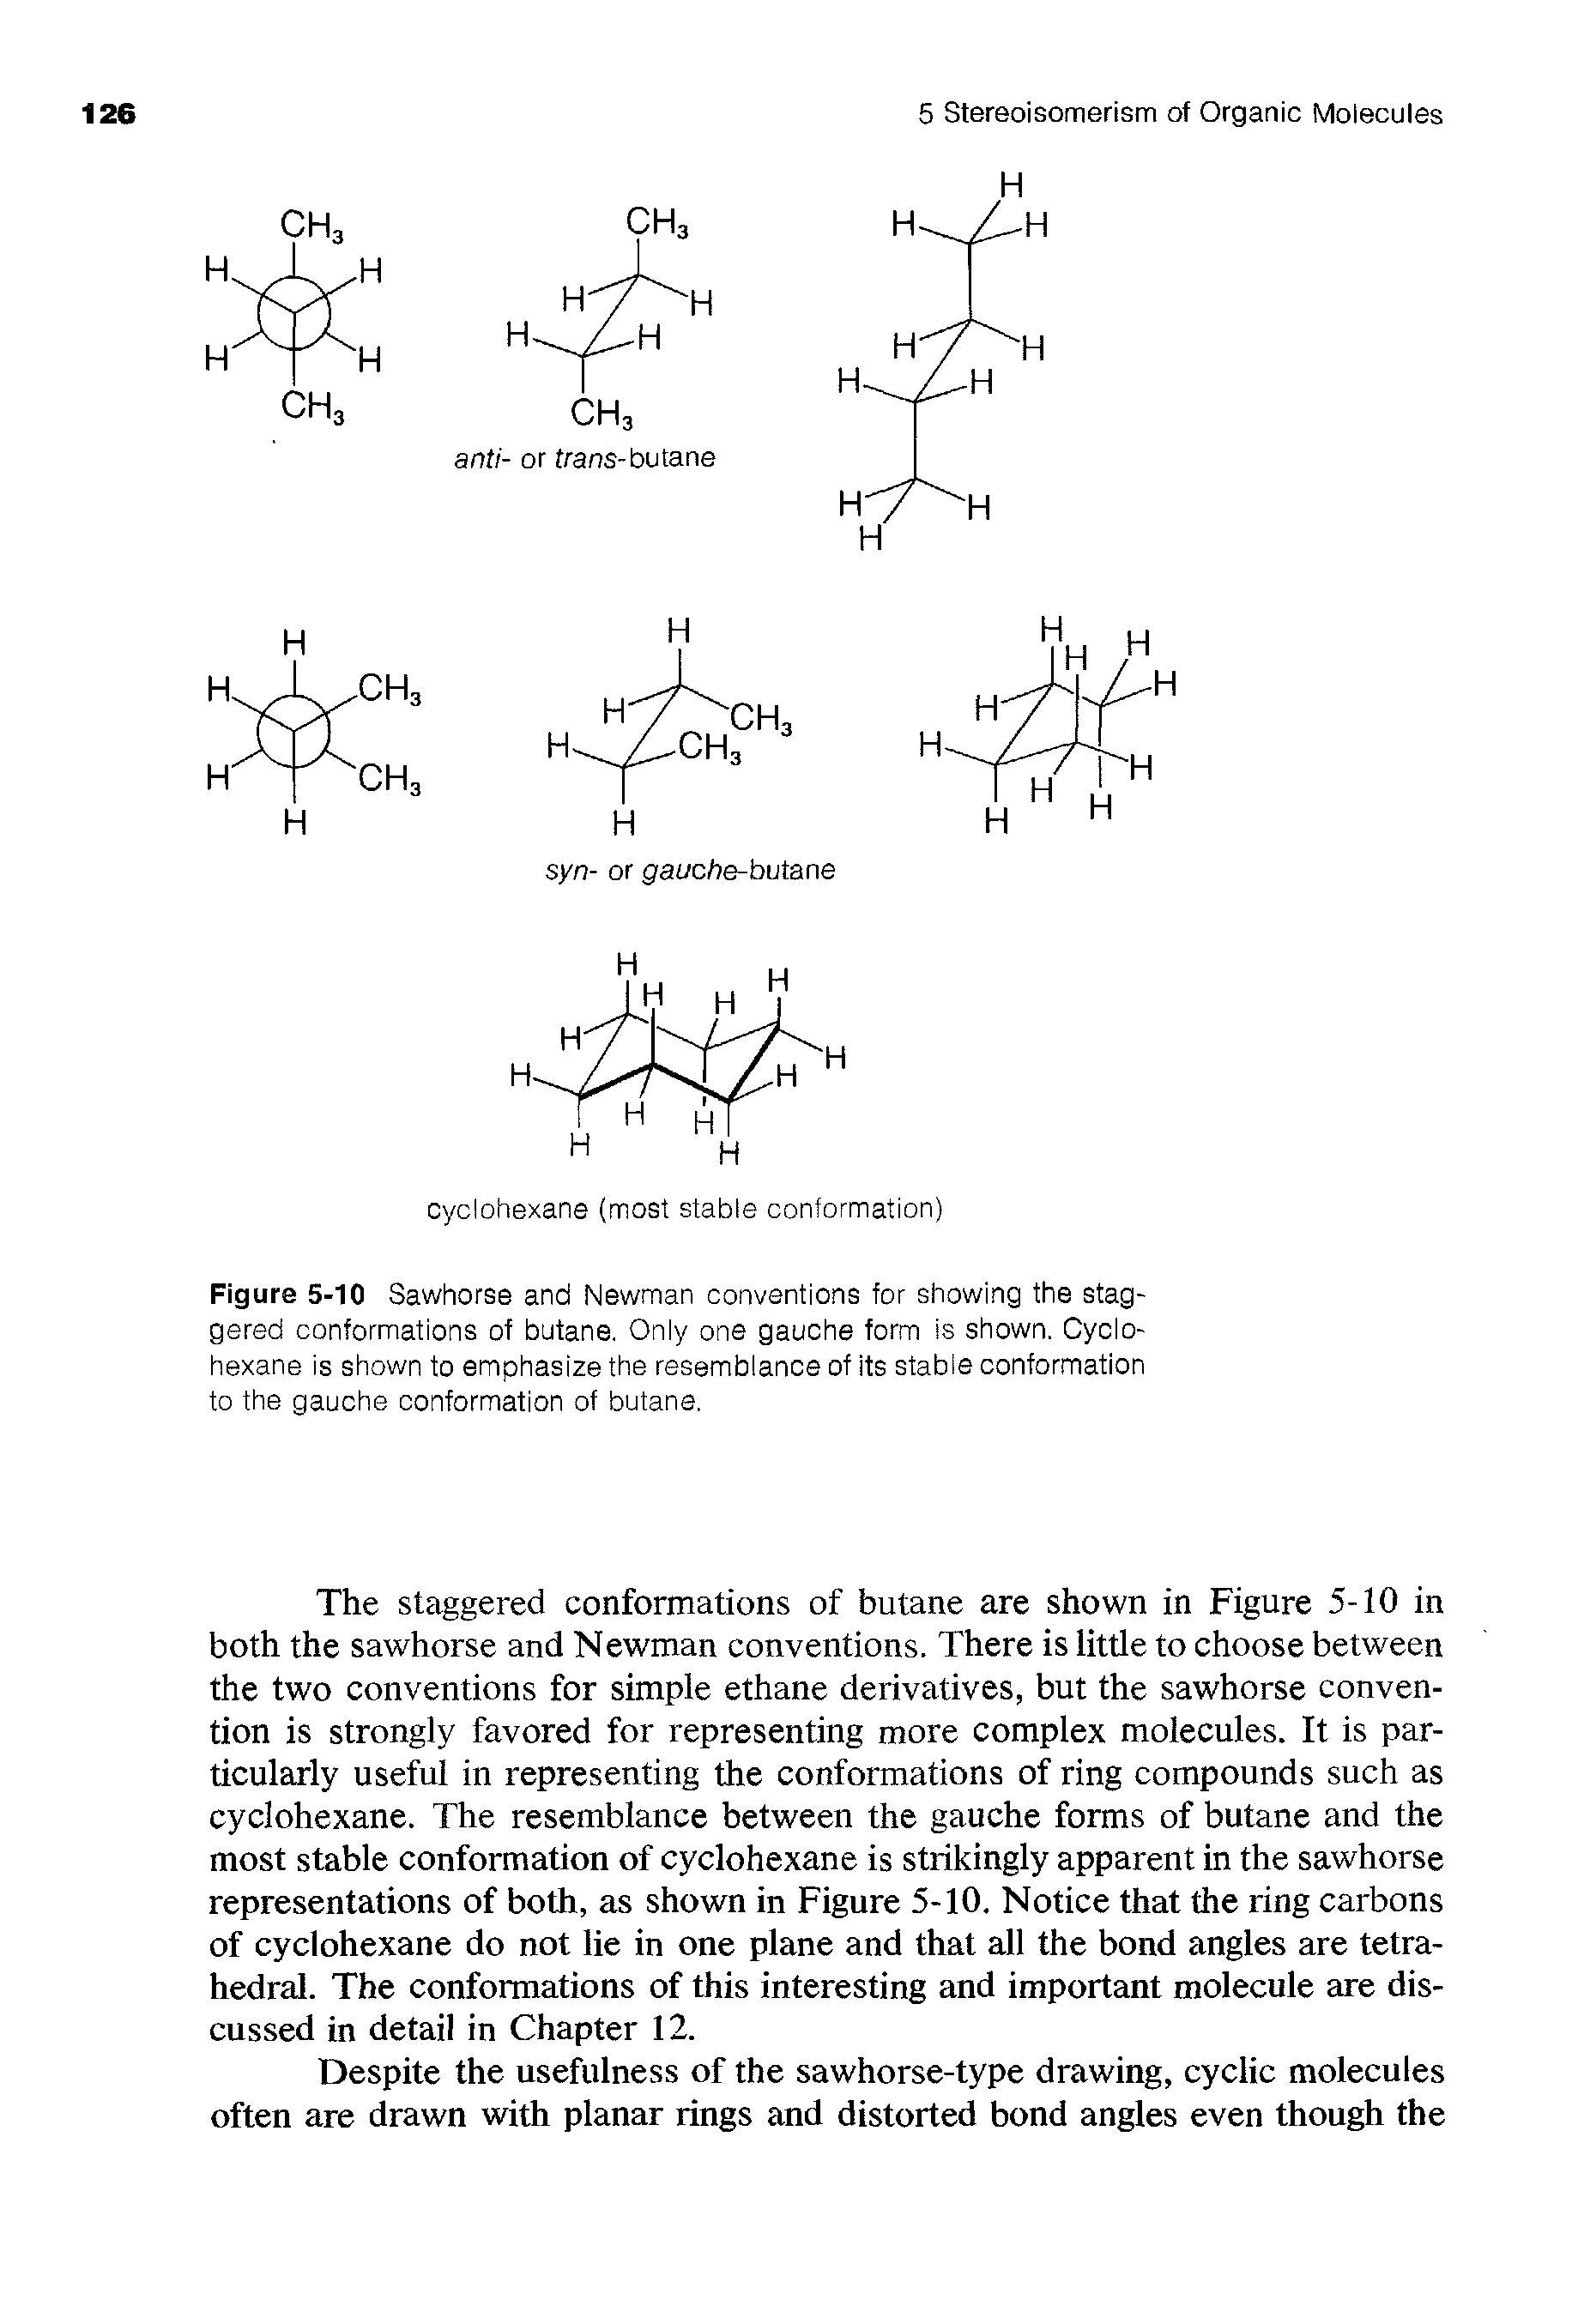 Figure 5-10 Sawhorse and Newman conventions for showing the staggered conformations of butane. Only one gauche form is shown. Cyclohexane is shown to emphasize the resemblance of its stable conformation to the gauche conformation of butane.